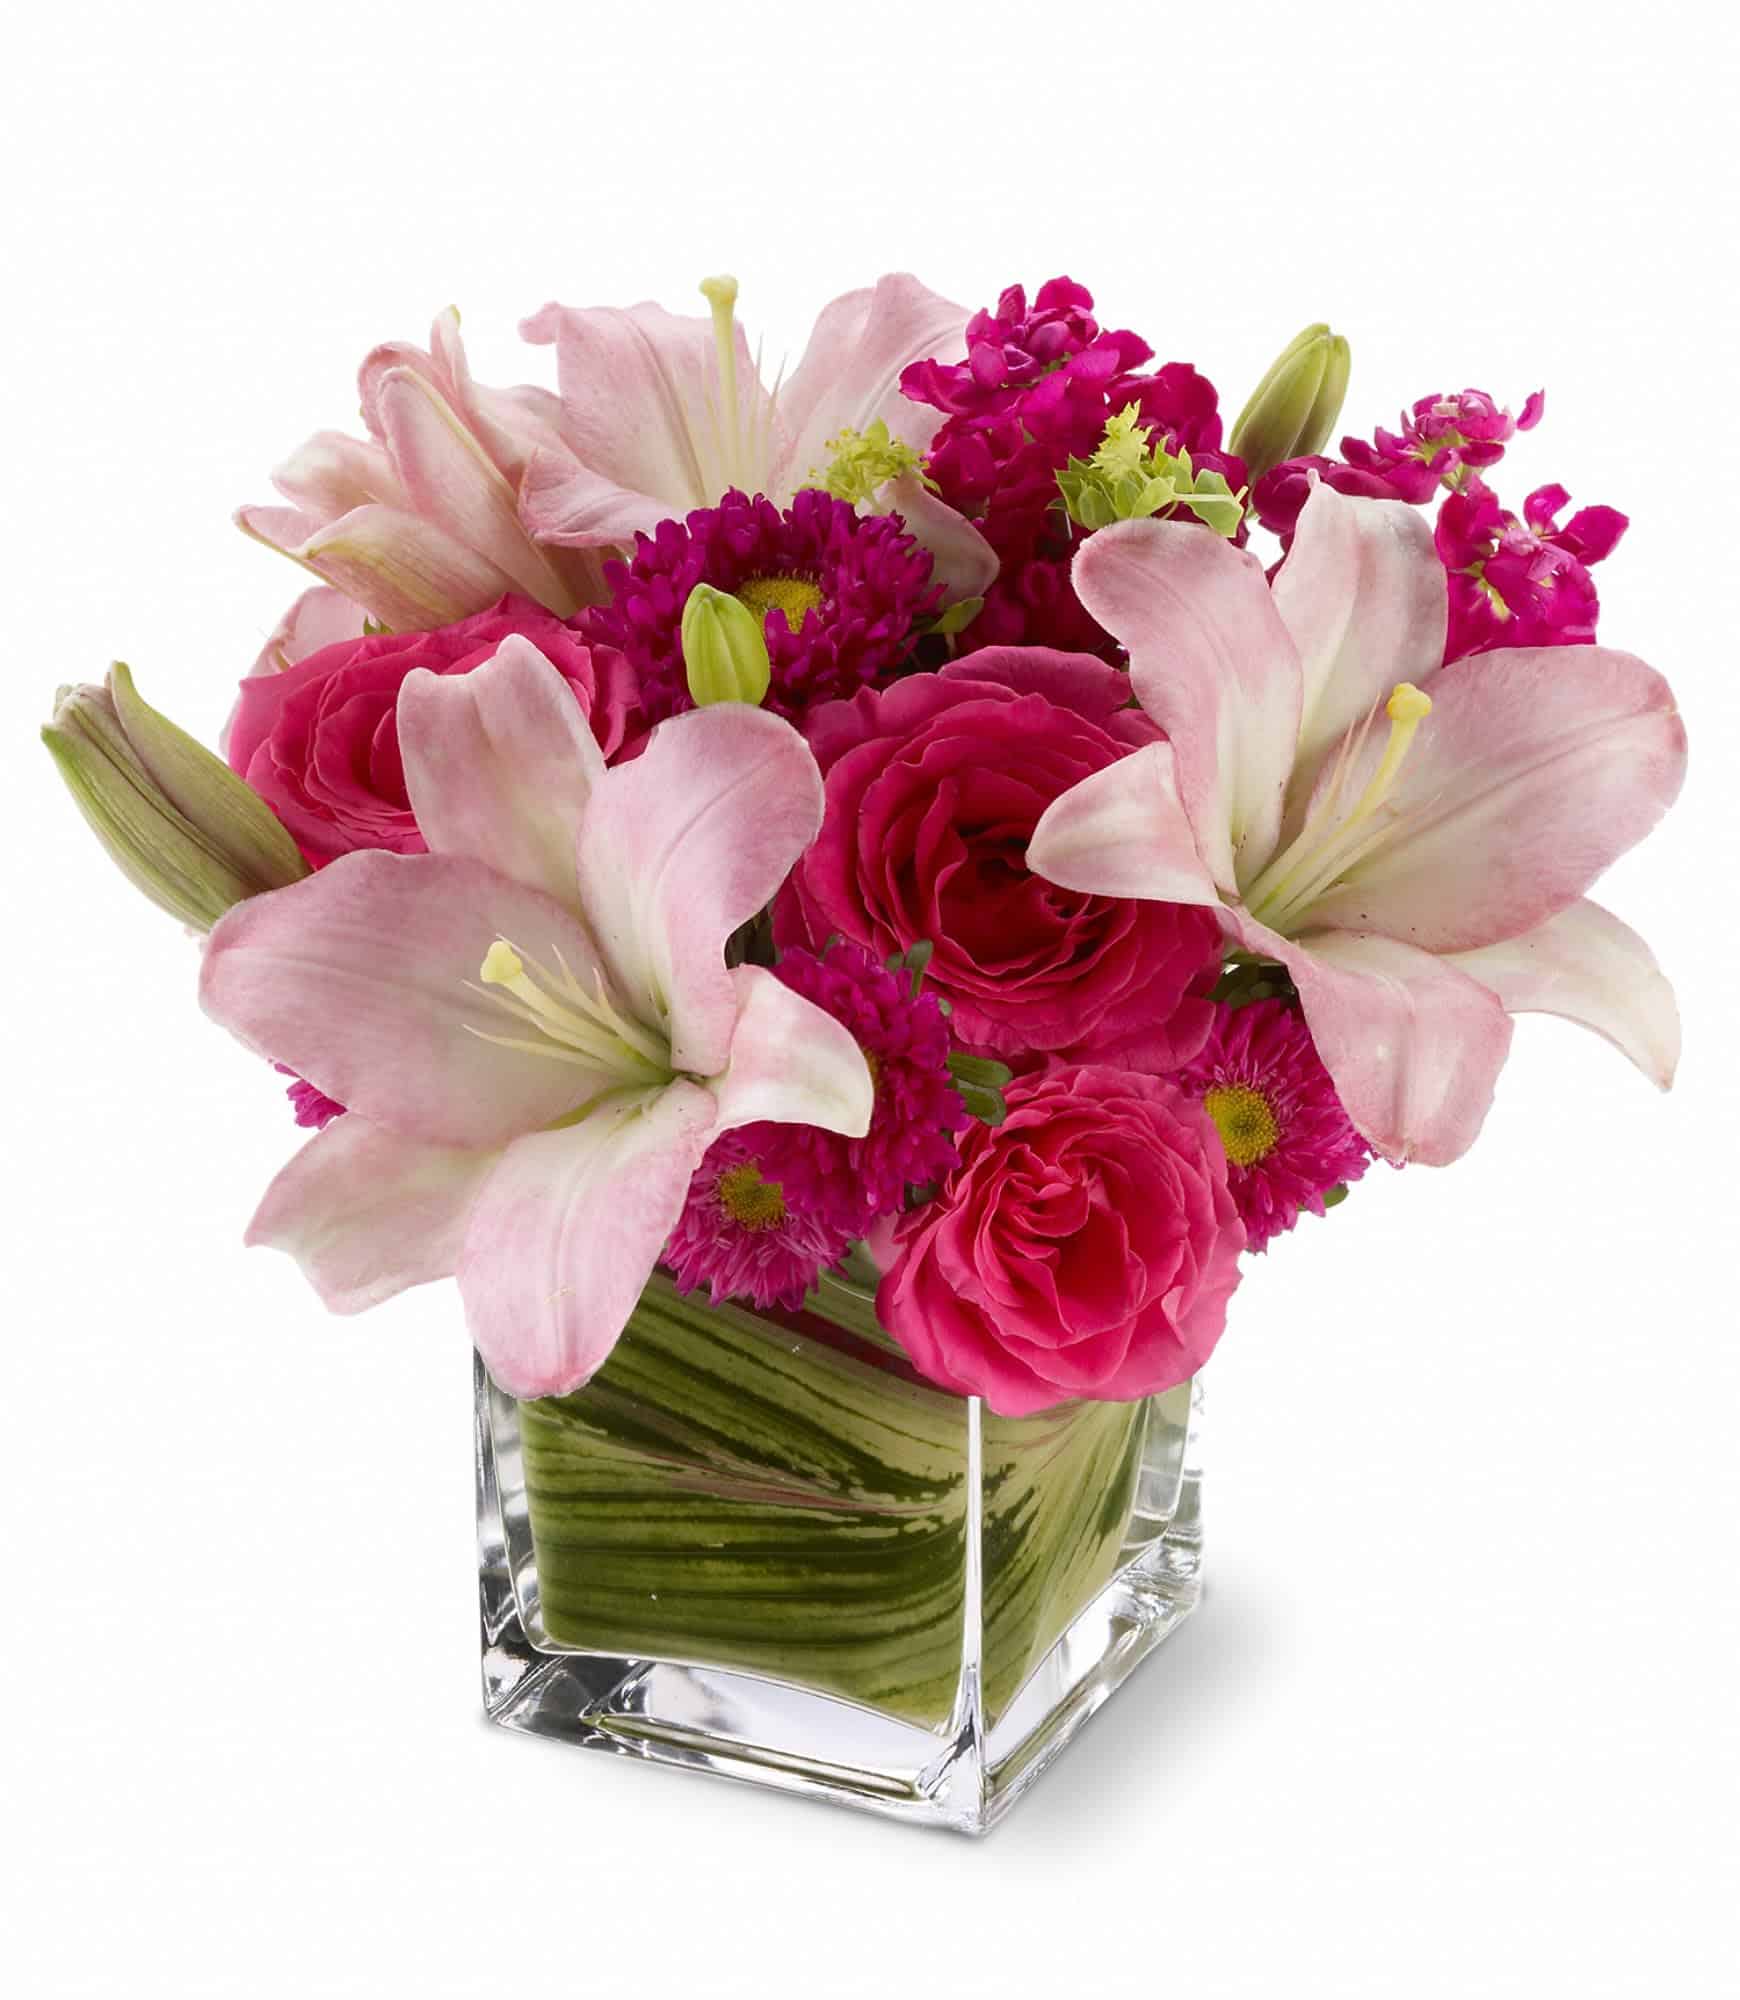 hot pink roses, pale pink lilies and mixed blossoms